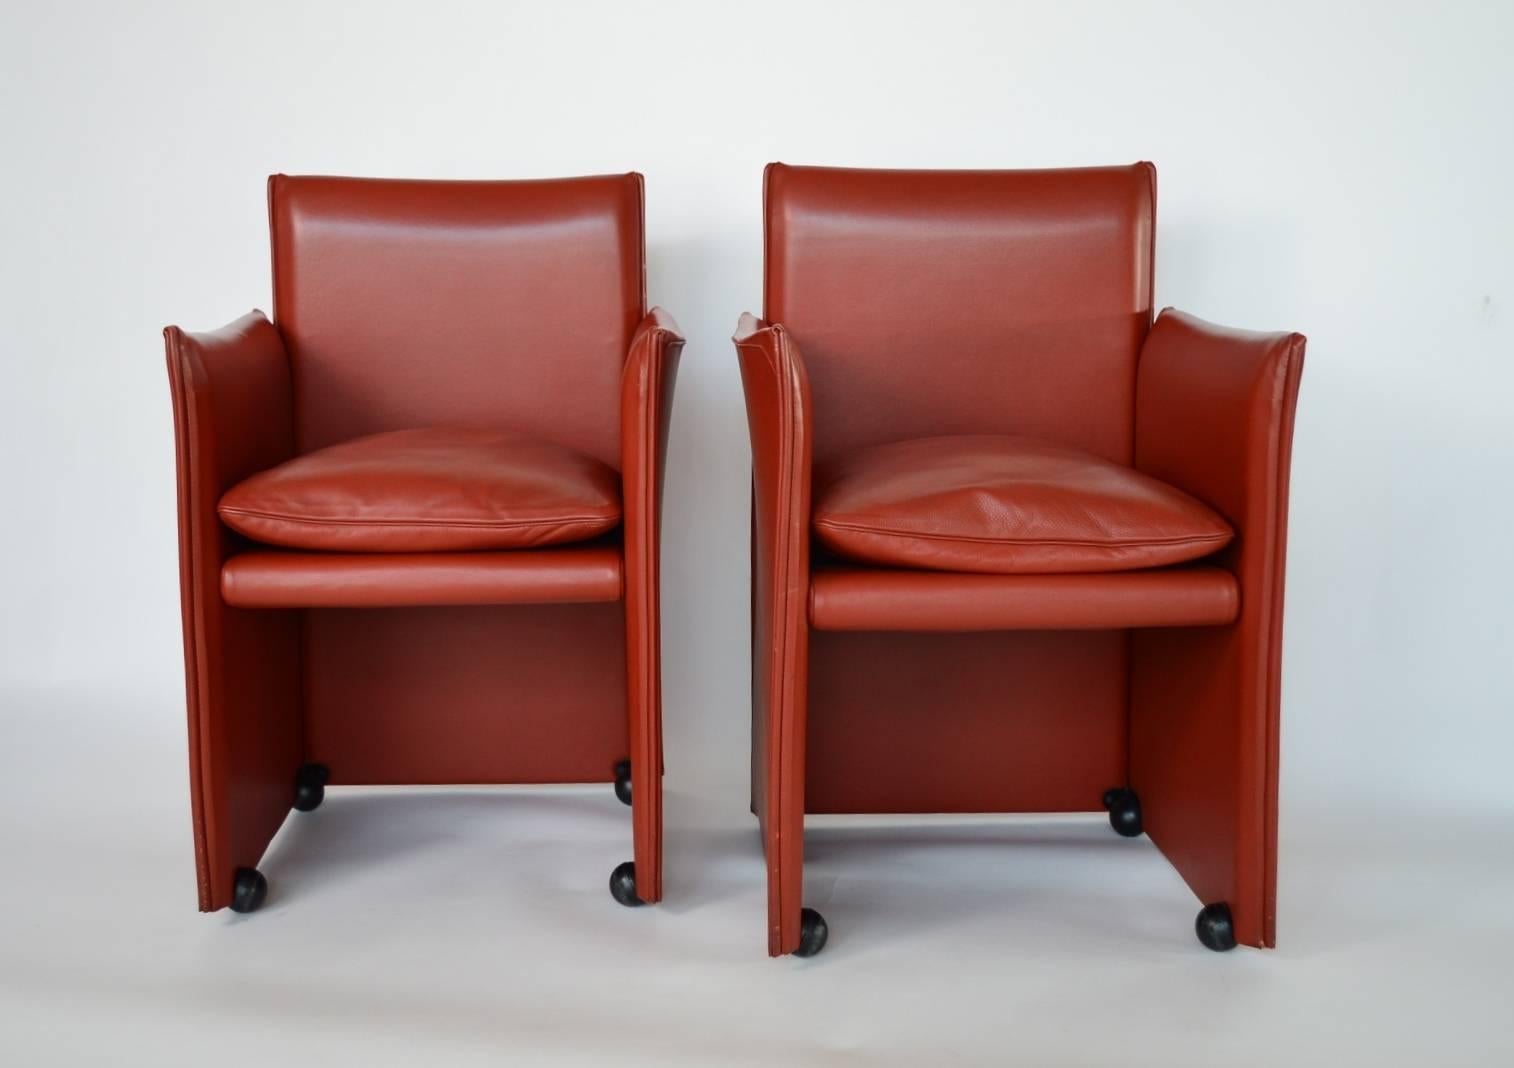 A wonderful pair of lounge chairs designed by Mario Bellini and manufactured by Cassina, Italy, in the 1980s. The design is from the 1970s.
Best craftsmanship with leather as soft as butter.
The soft down-filled cushions, the rollers and the